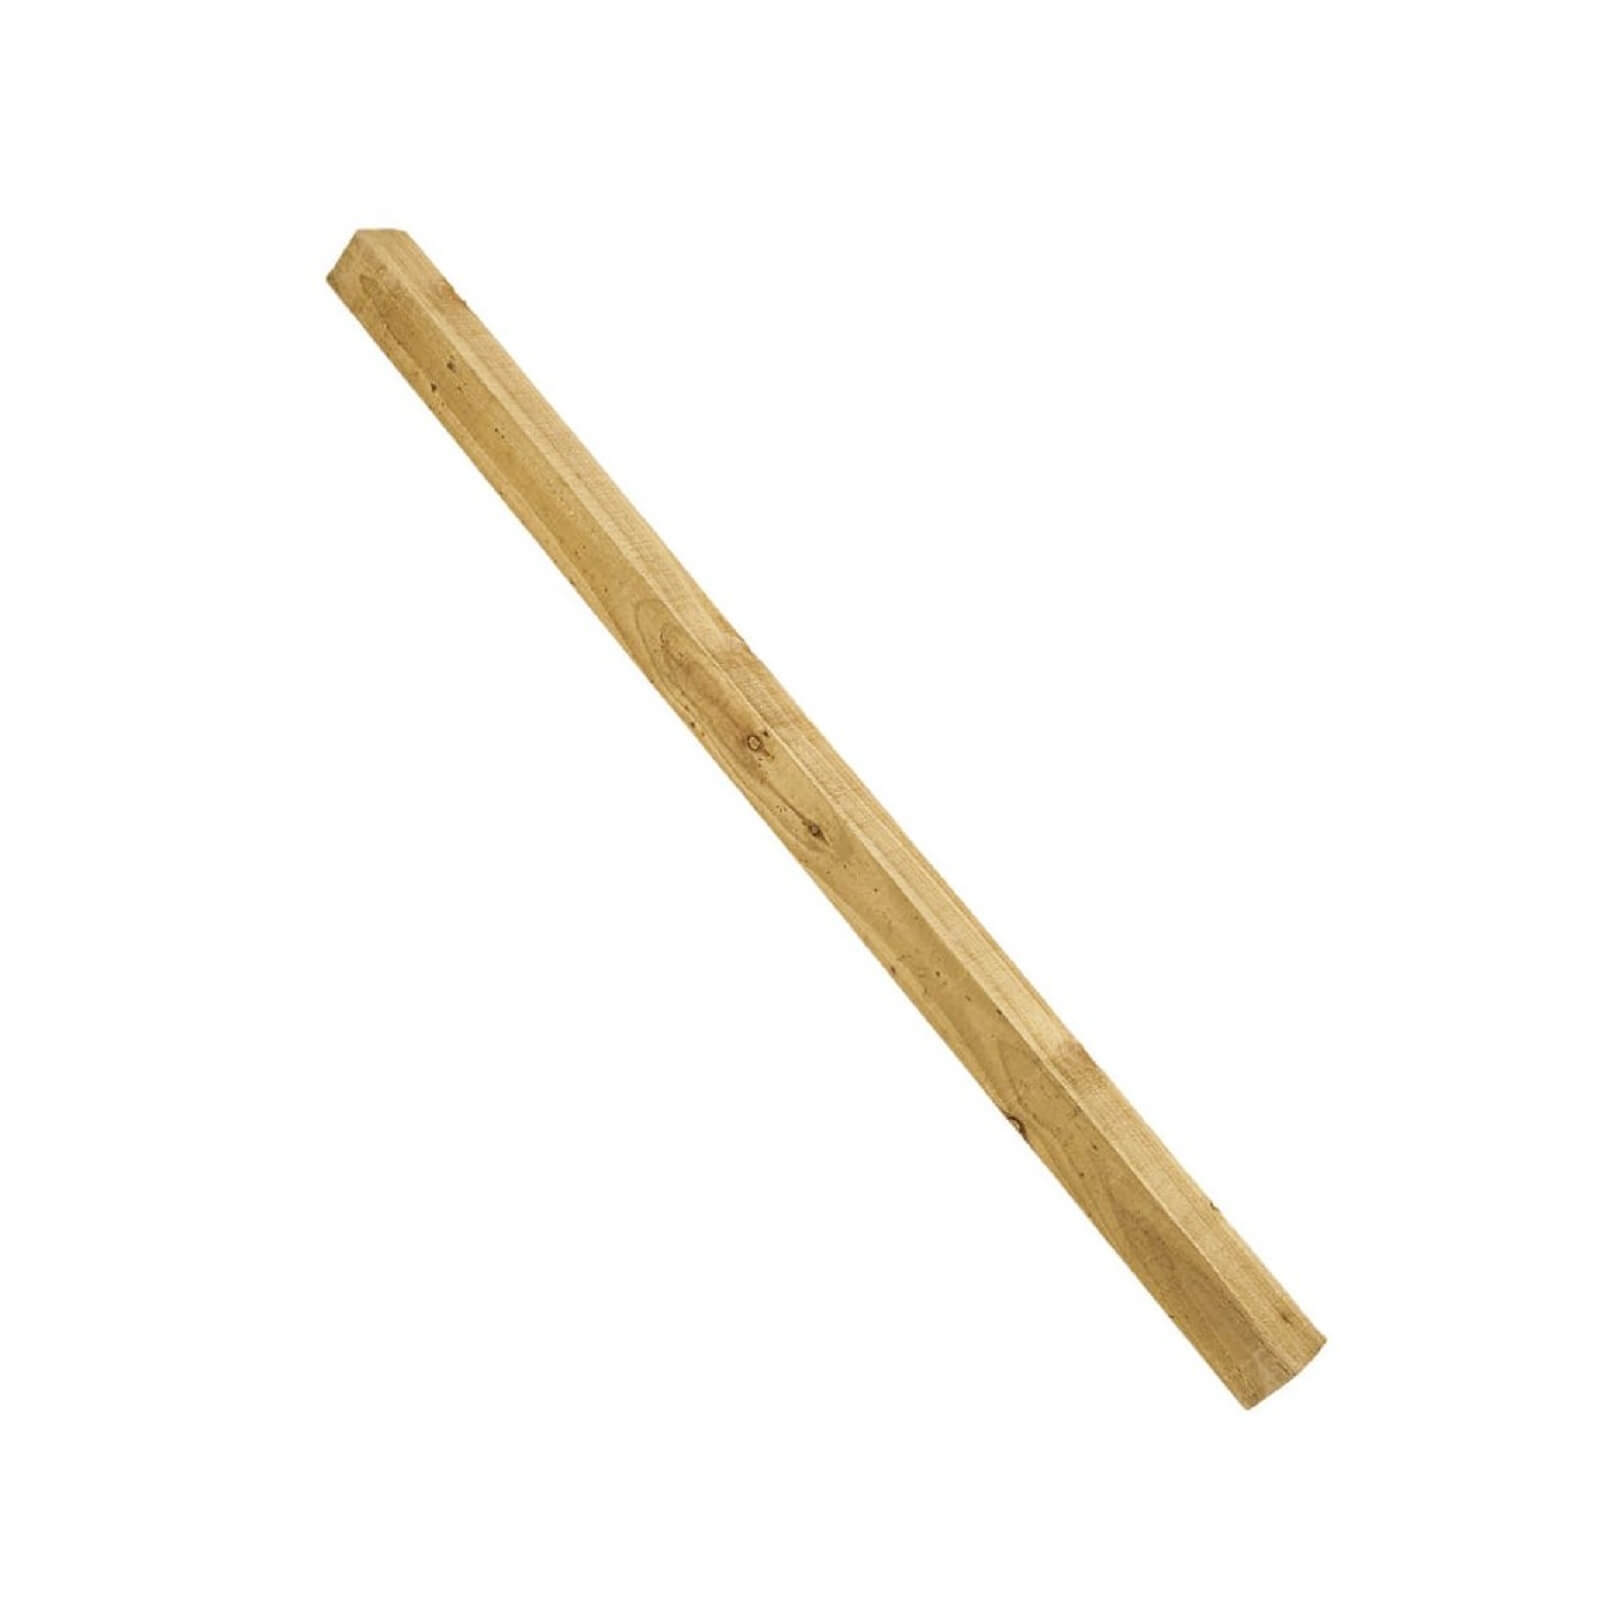 Forest Garden Larchlap Sawn Post 2.1m (2100 x 75 x 75mm) - Pack of 4